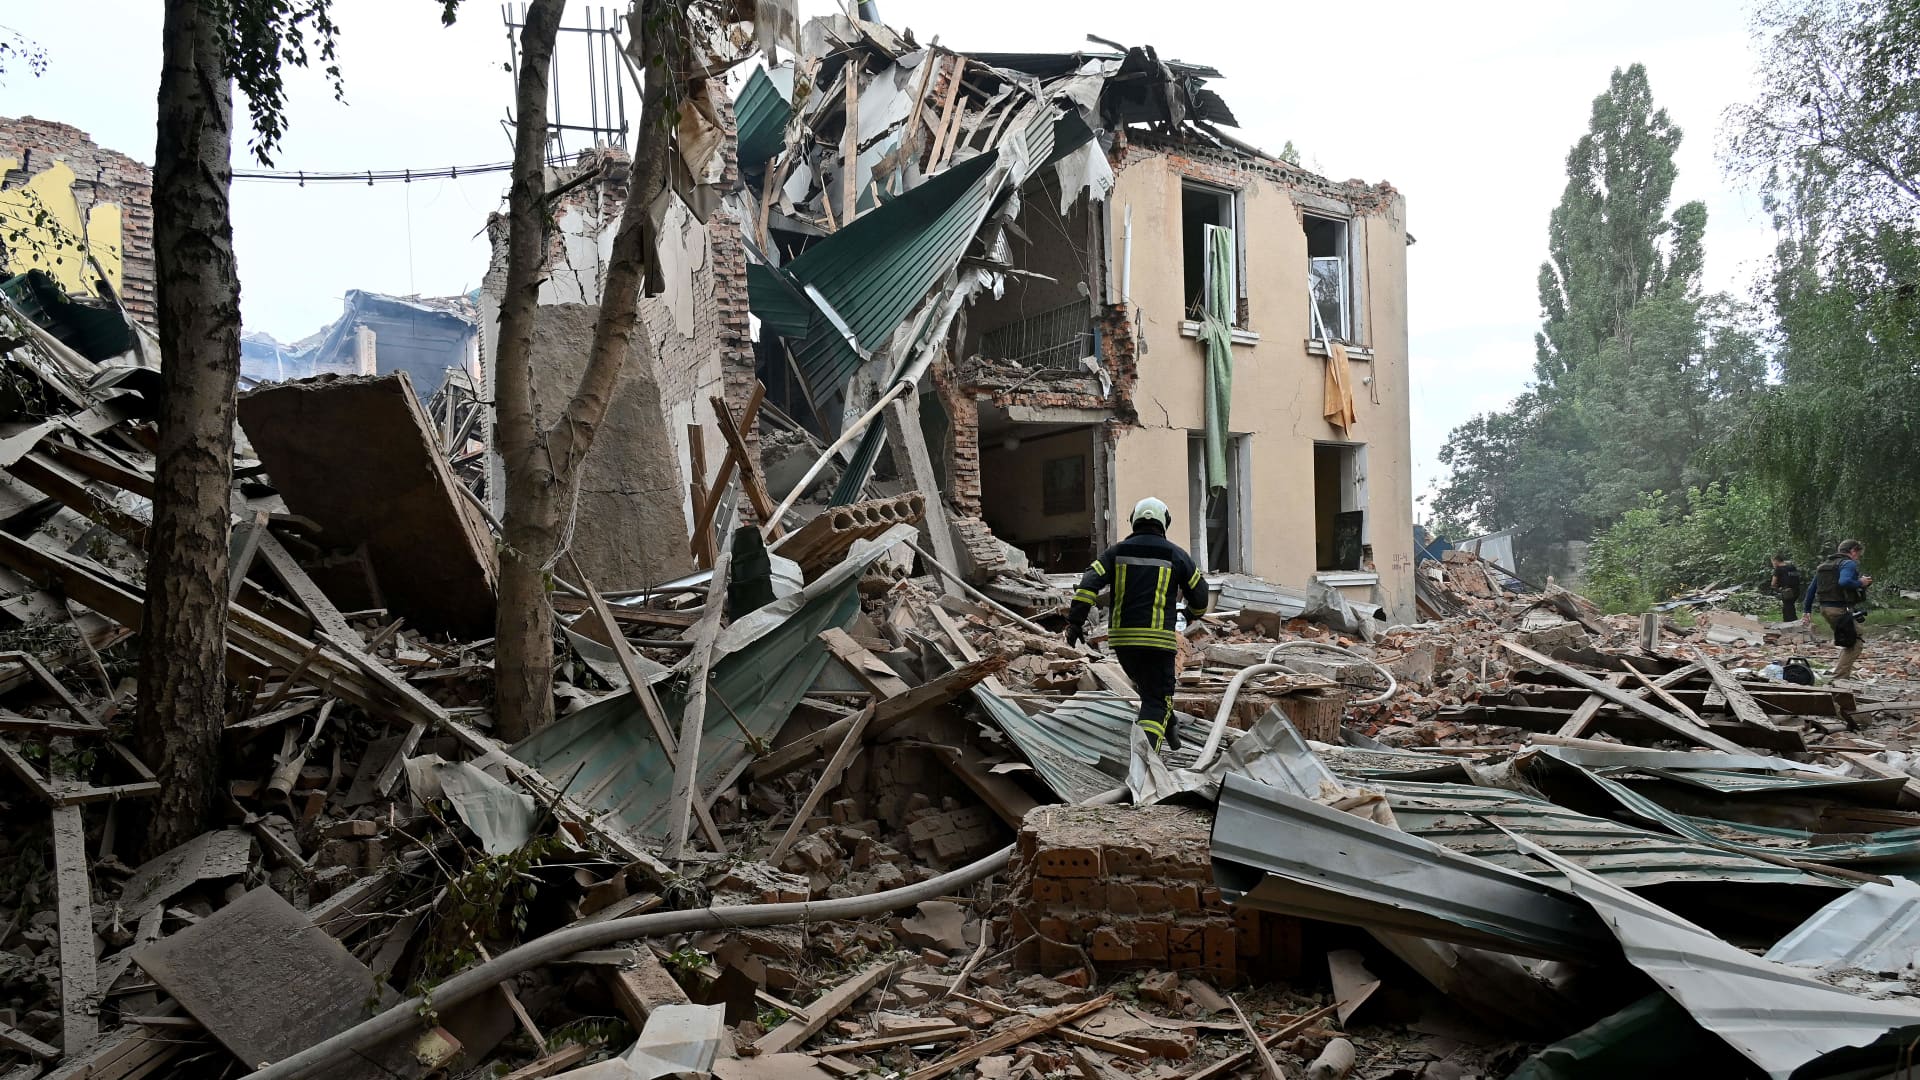 Rescue teams dig through the rubble of buildings destroyed in overnight attacks in a search for survivors, in the city of Chuhuiv, Kharkiv region, on July 25, 2022, amid the Russian invasion of Ukraine.